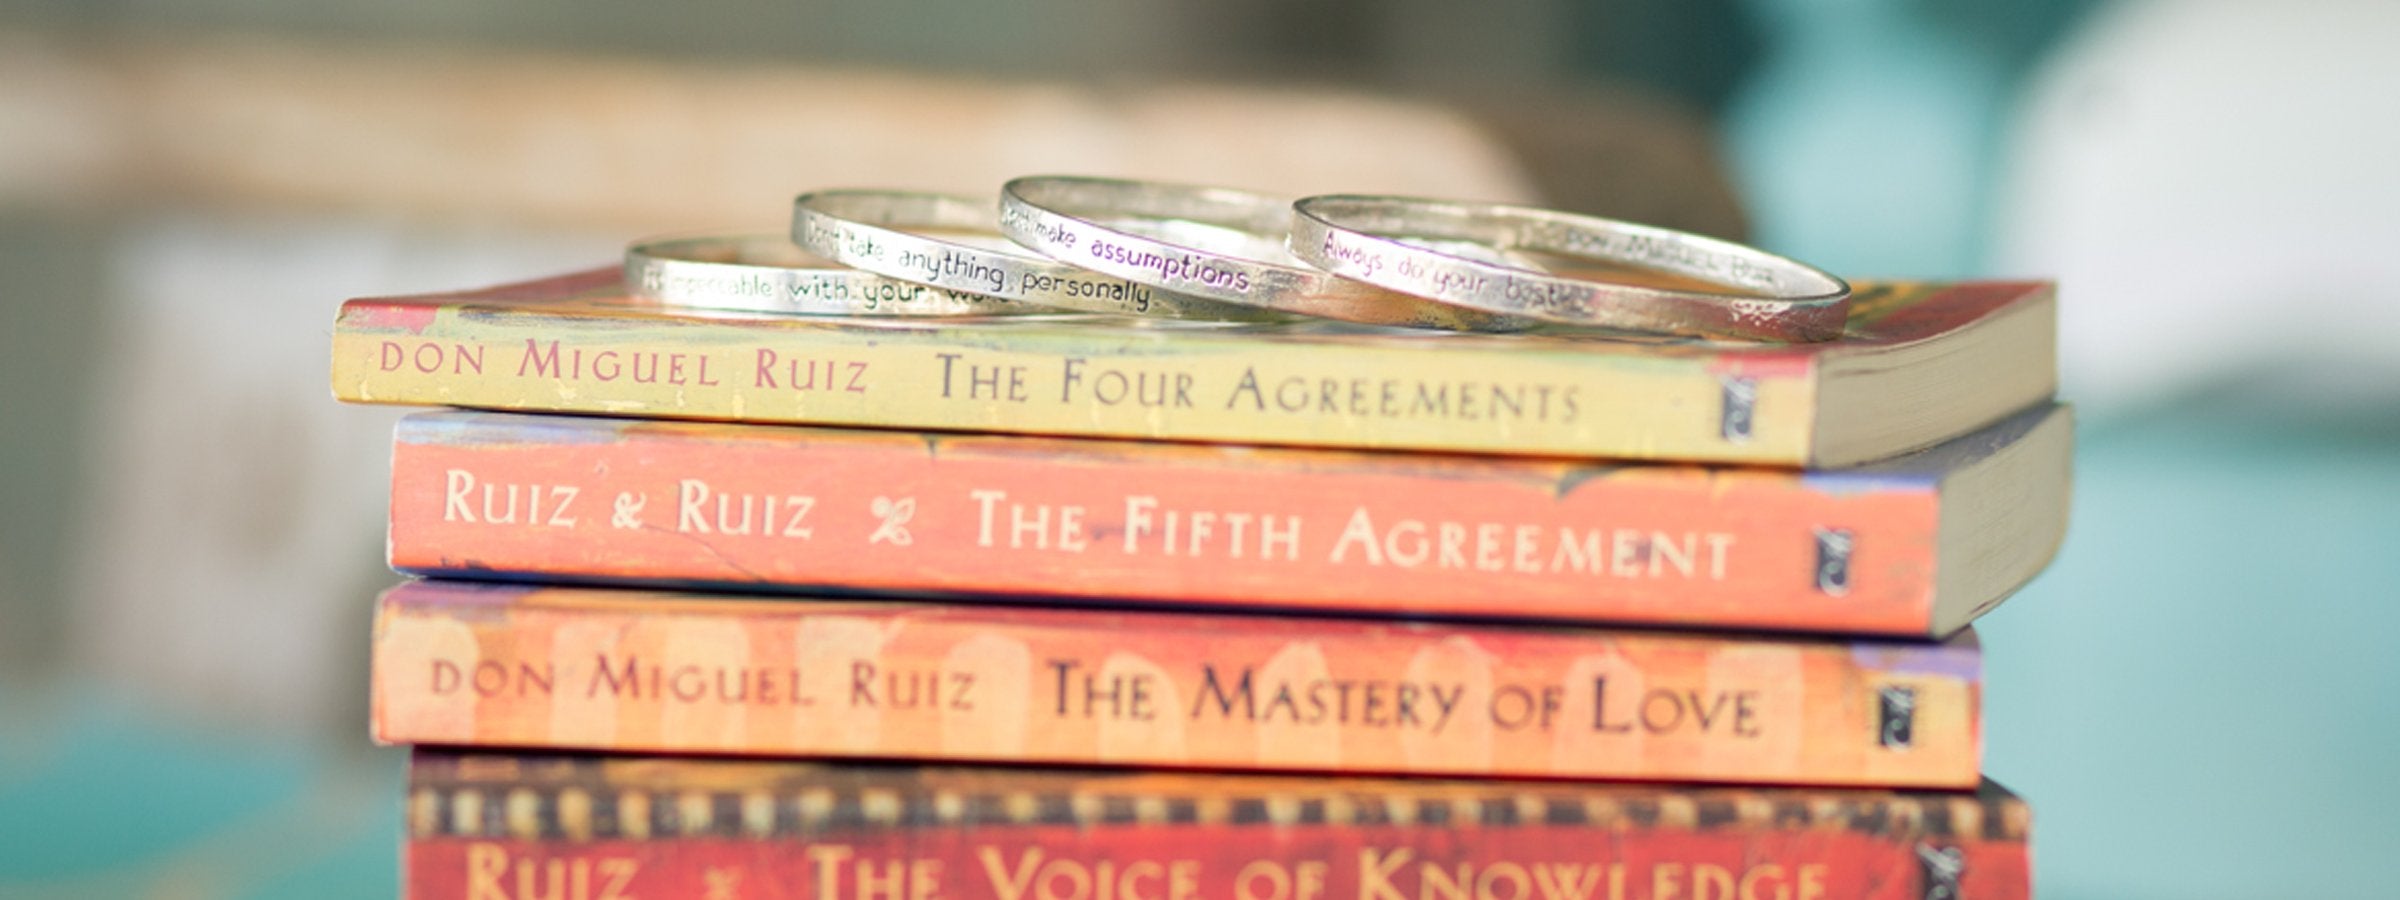 the four agreements jewelry